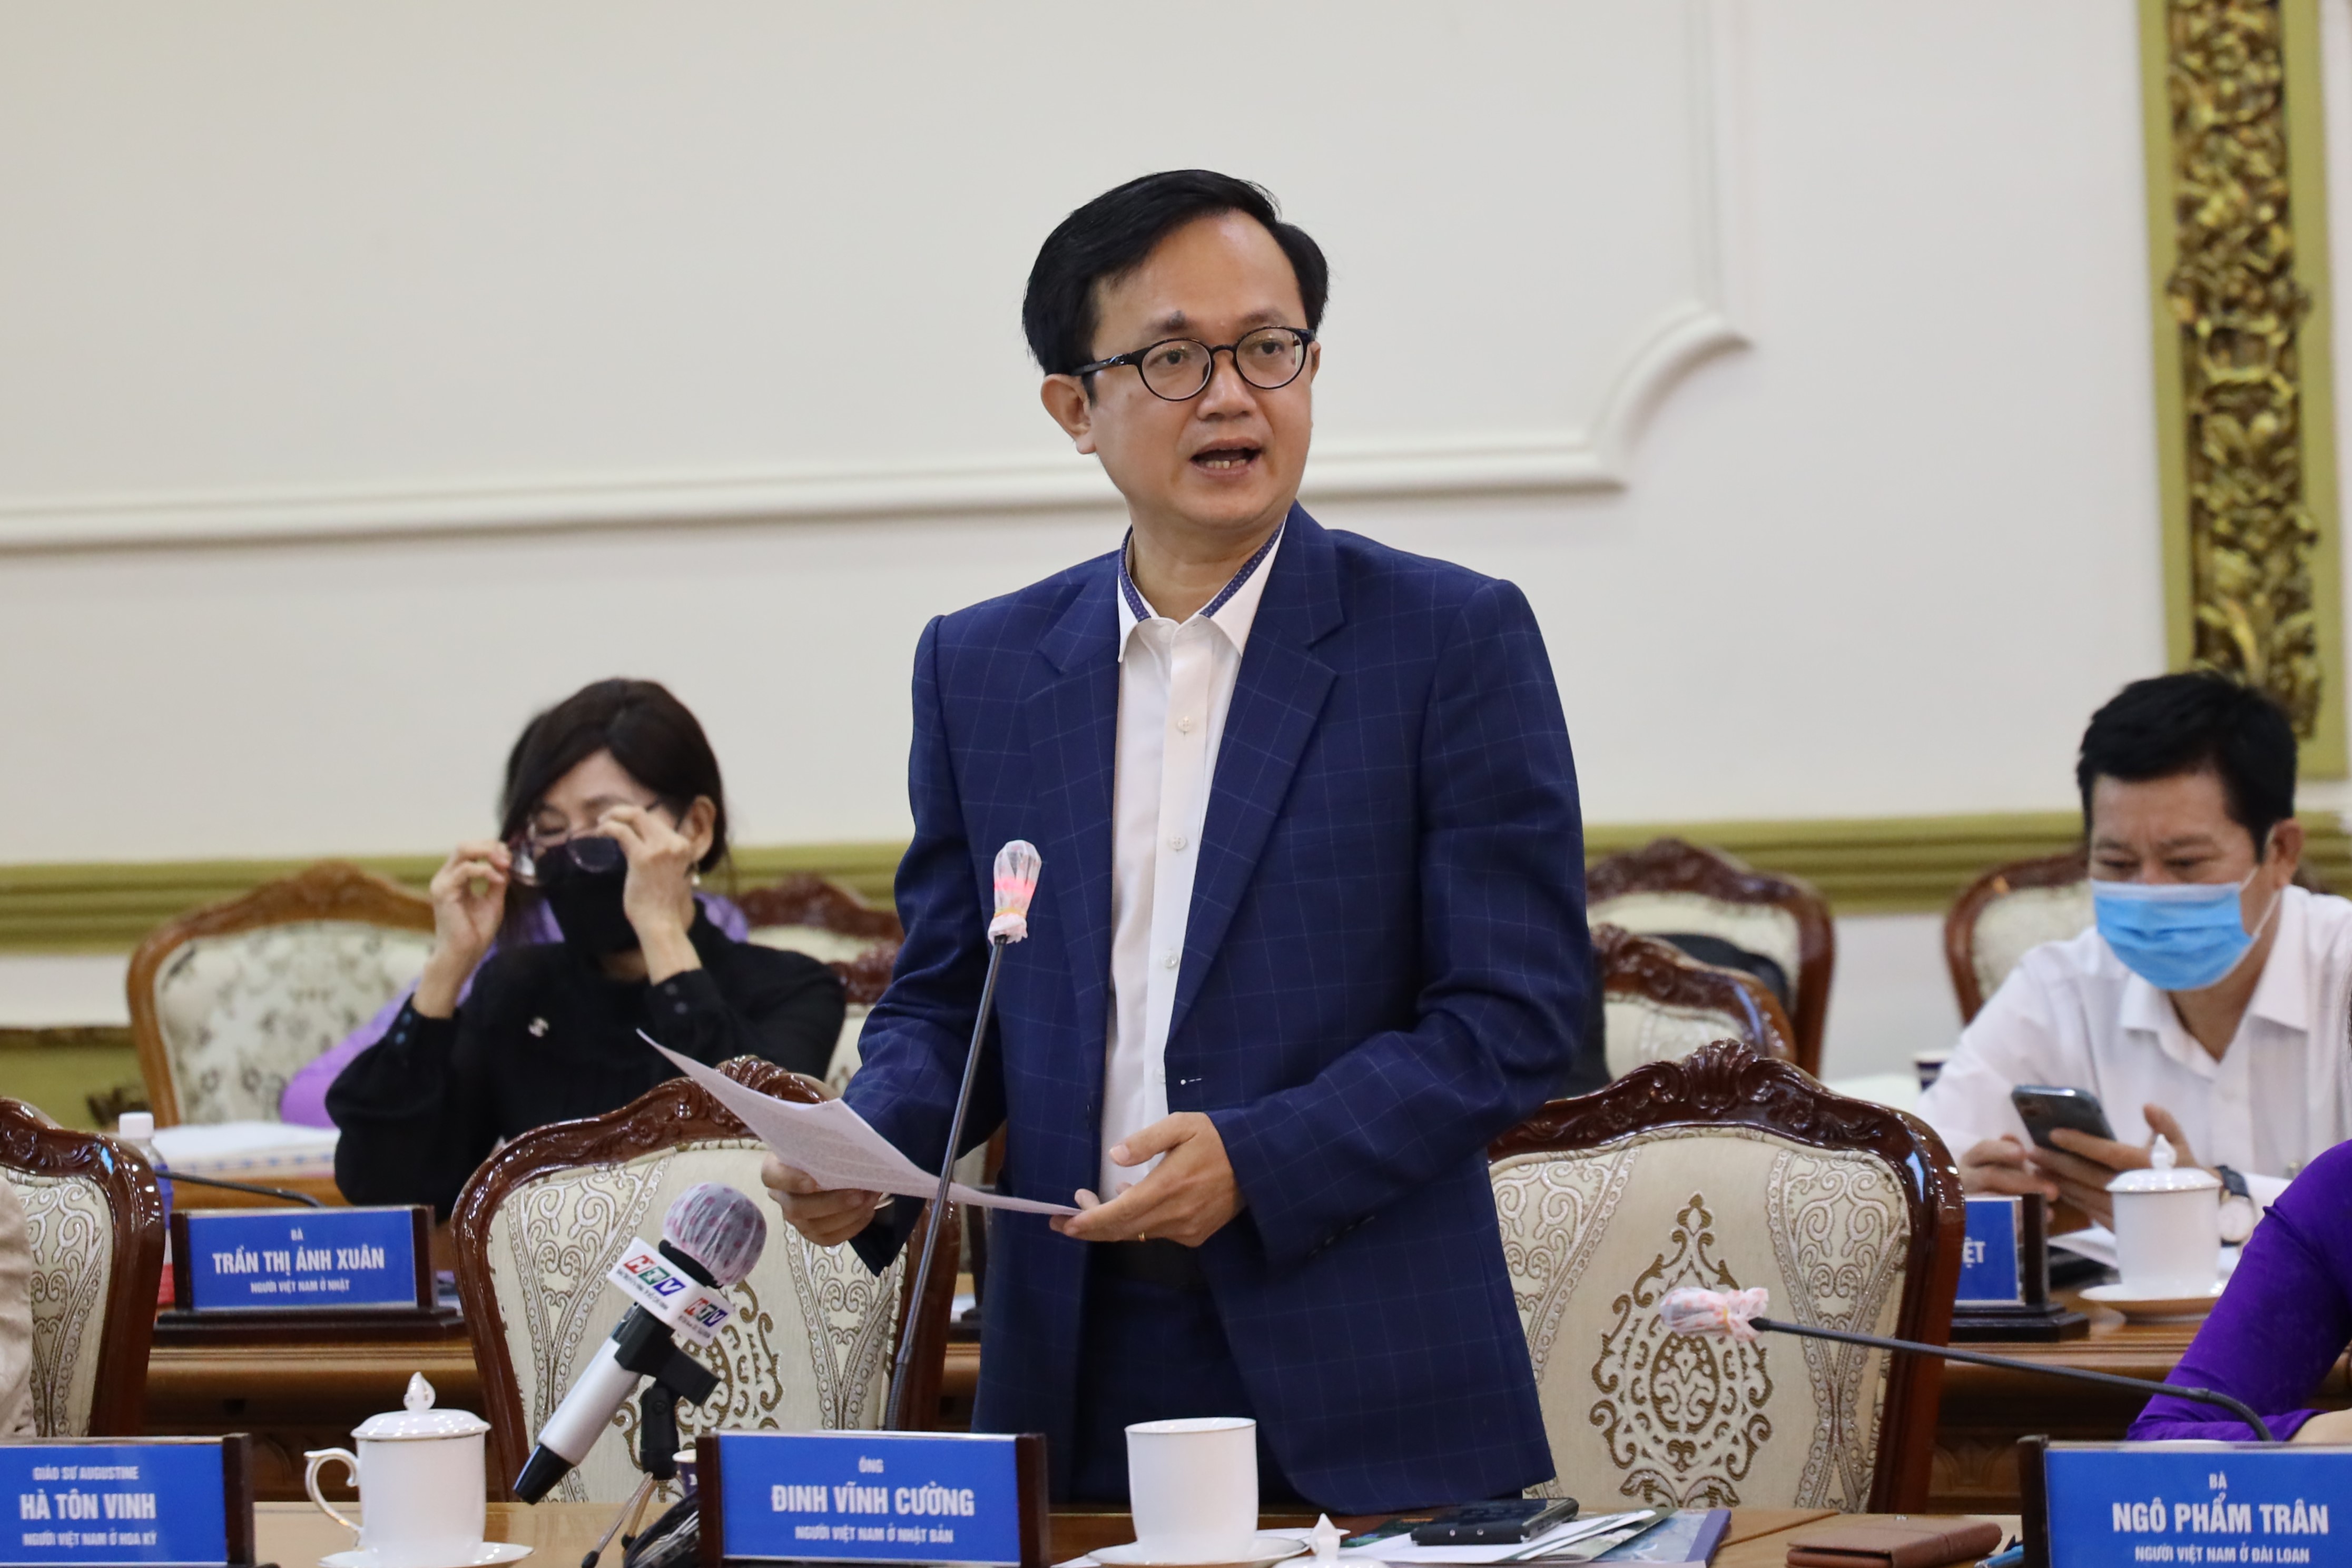 Dinh Vinh Cuong, a Vietnamese logistics expert living in Japan, speaks at a conference discussing ideas for the sustainable development of Ho Chi Minh City in the context of living safely with COVID-19, December 14, 2021. Photo: Ho Chi Minh City Press Center